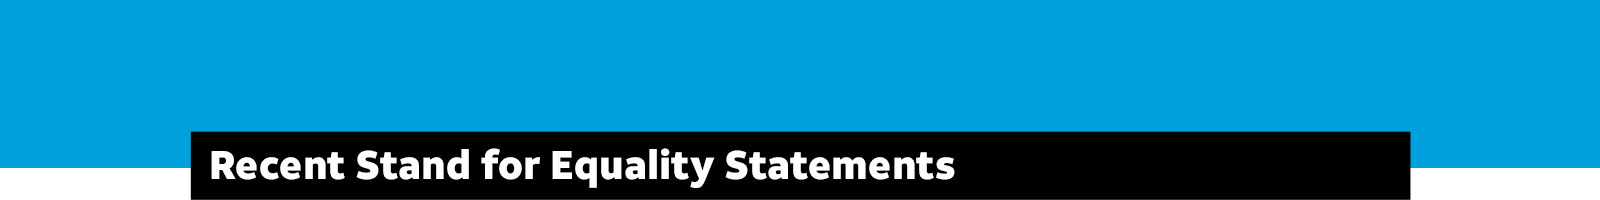 Recent stand for equality statements banner